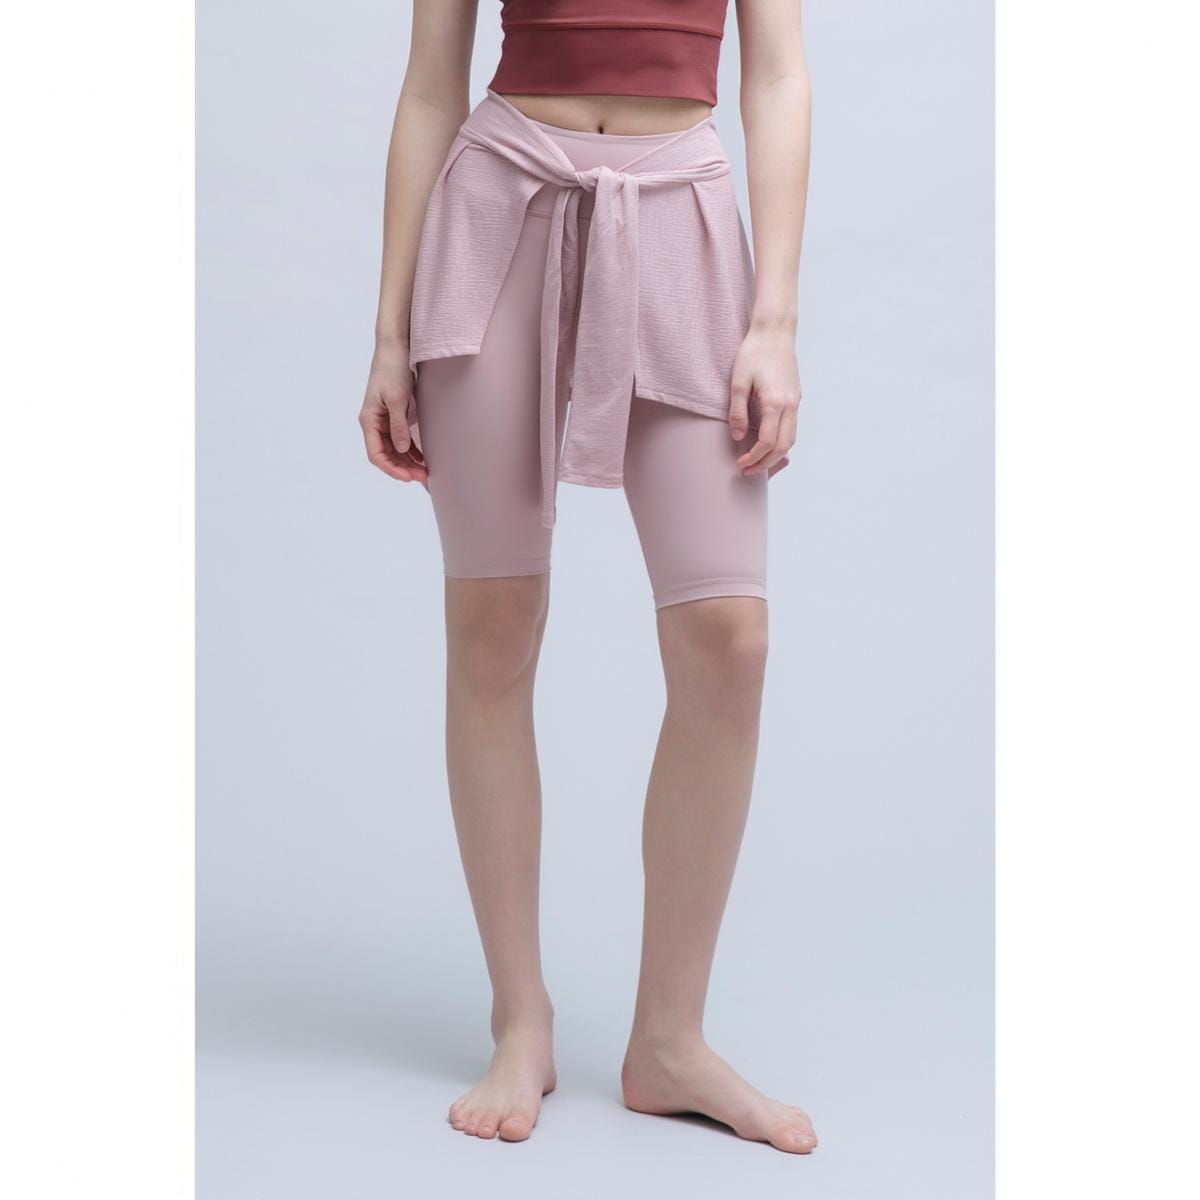 【BARREL】FIT LEGGINGS COVER UP 美臀罩衫 #DUSTY PINK 0